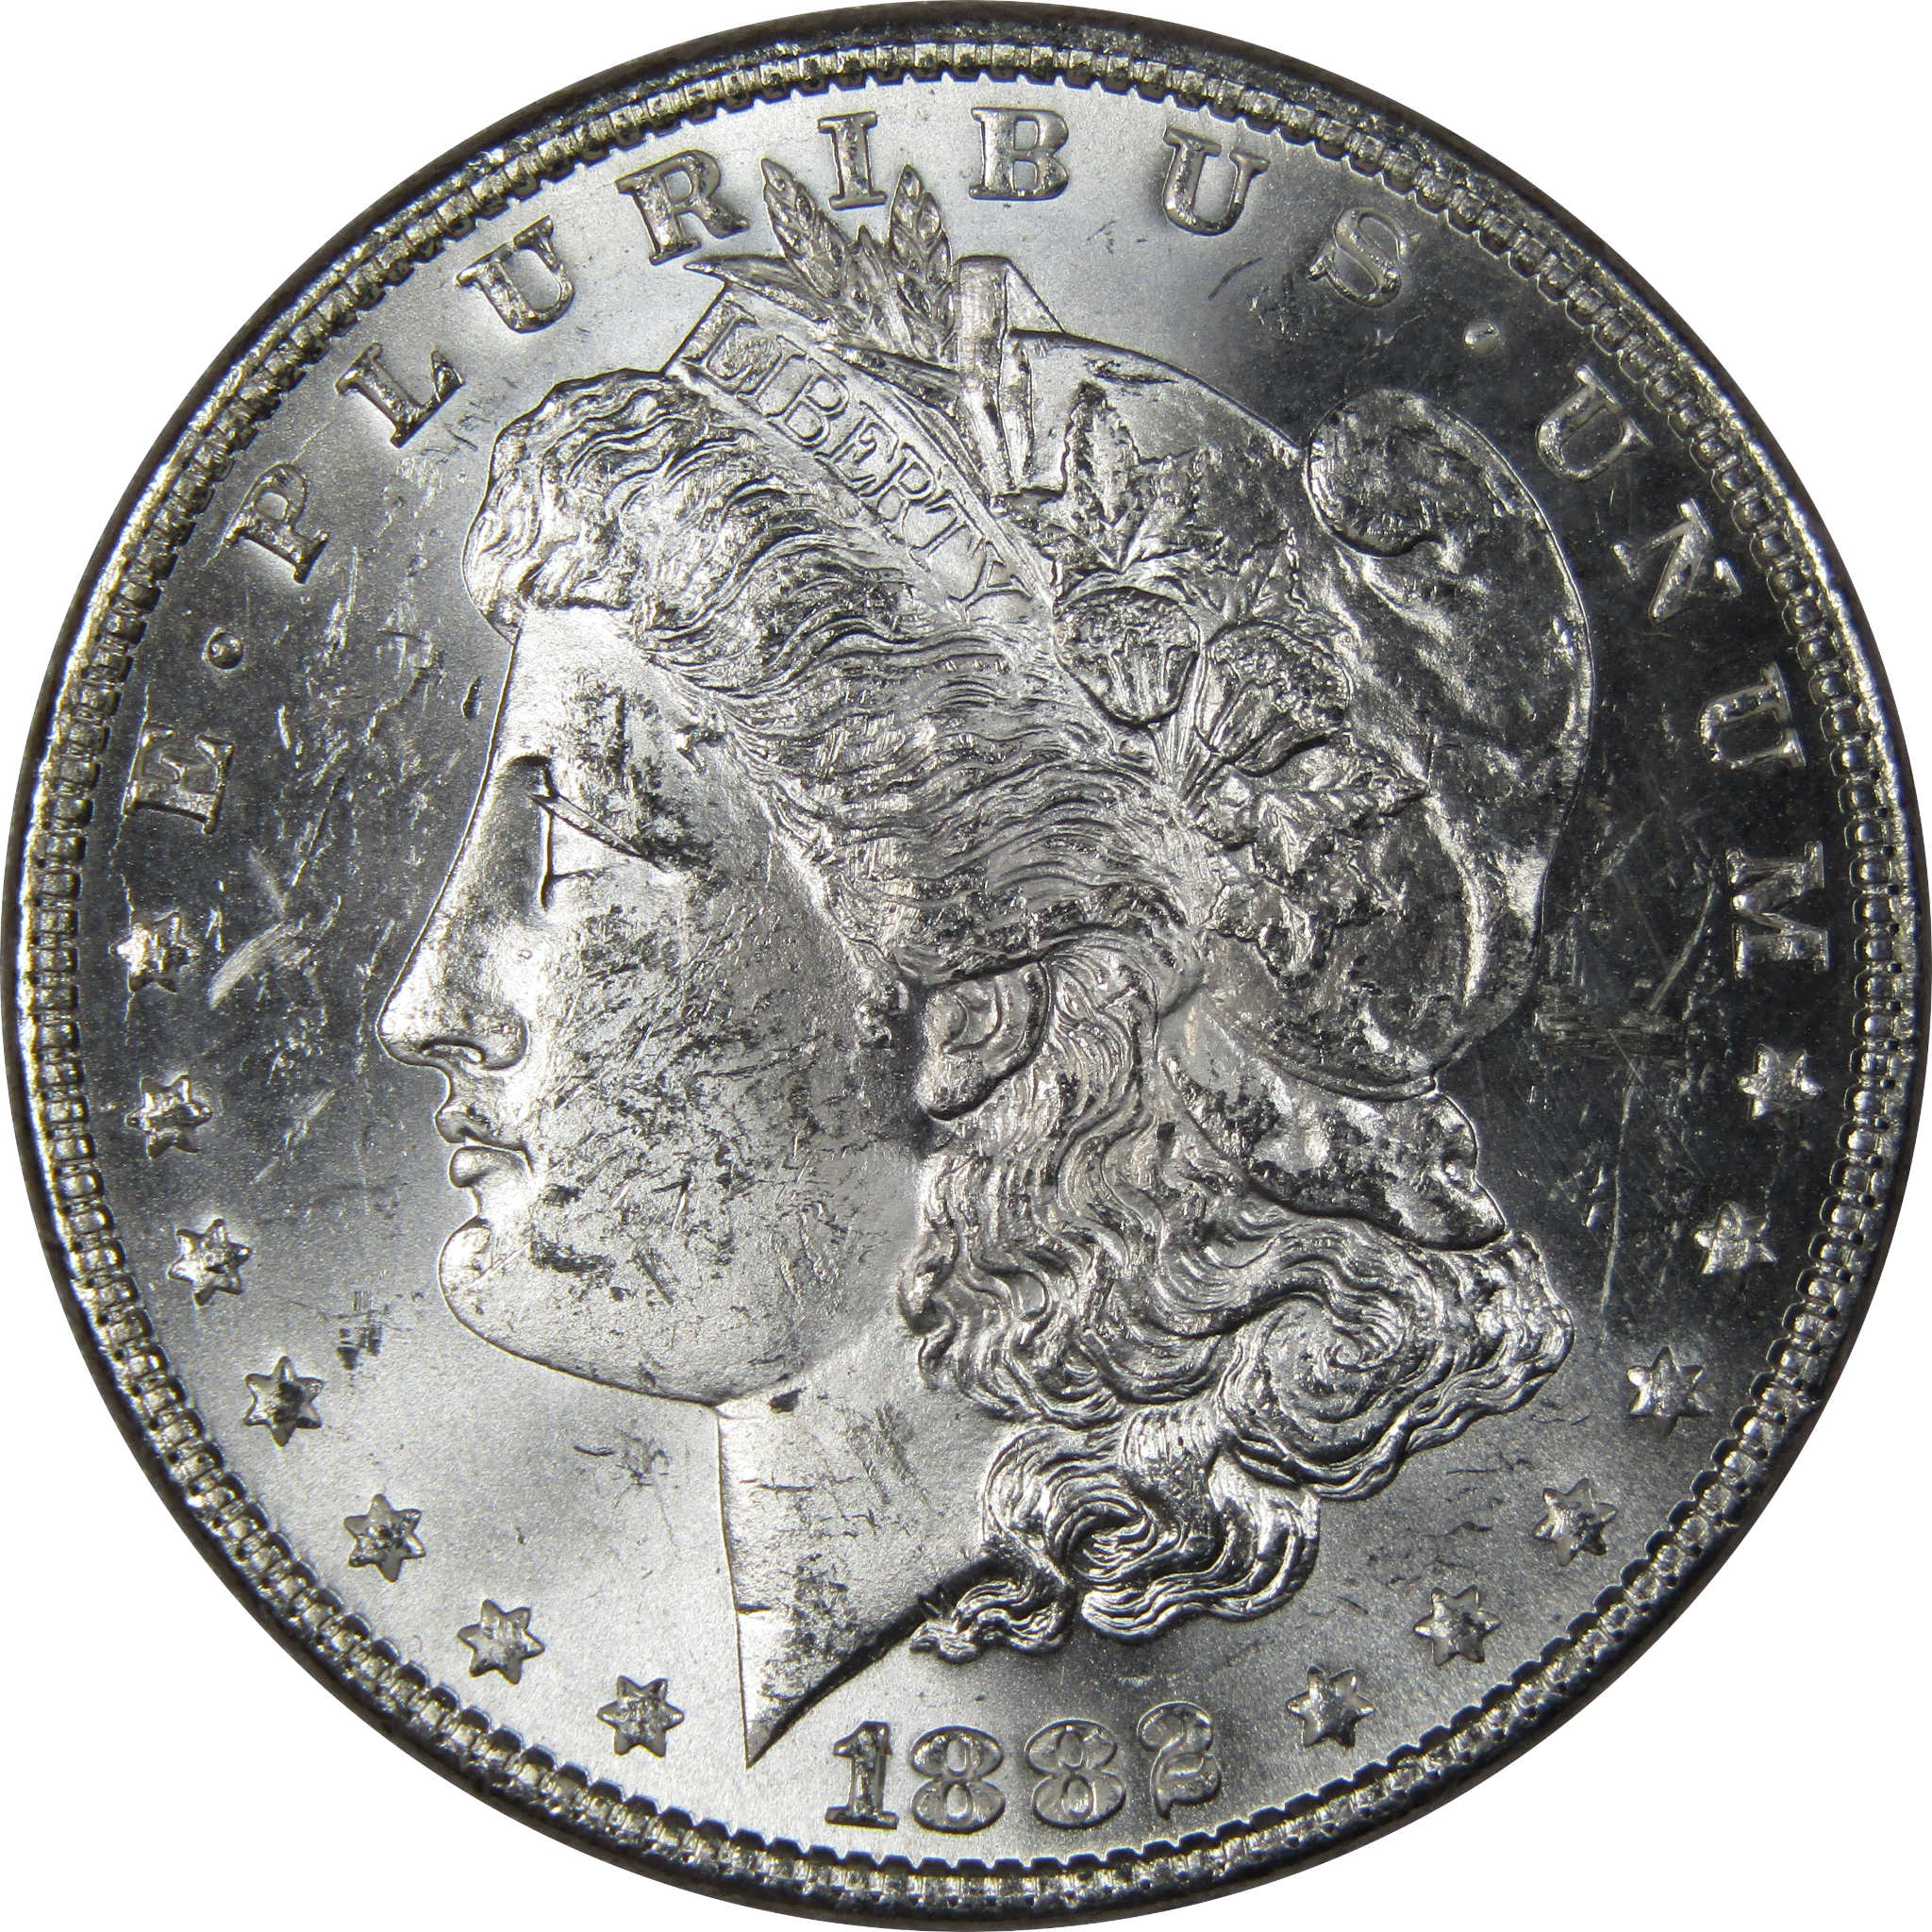 1882 Morgan Dollar BU Uncirculated Mint State 90% Silver SKU:IPC9695 - Morgan coin - Morgan silver dollar - Morgan silver dollar for sale - Profile Coins &amp; Collectibles